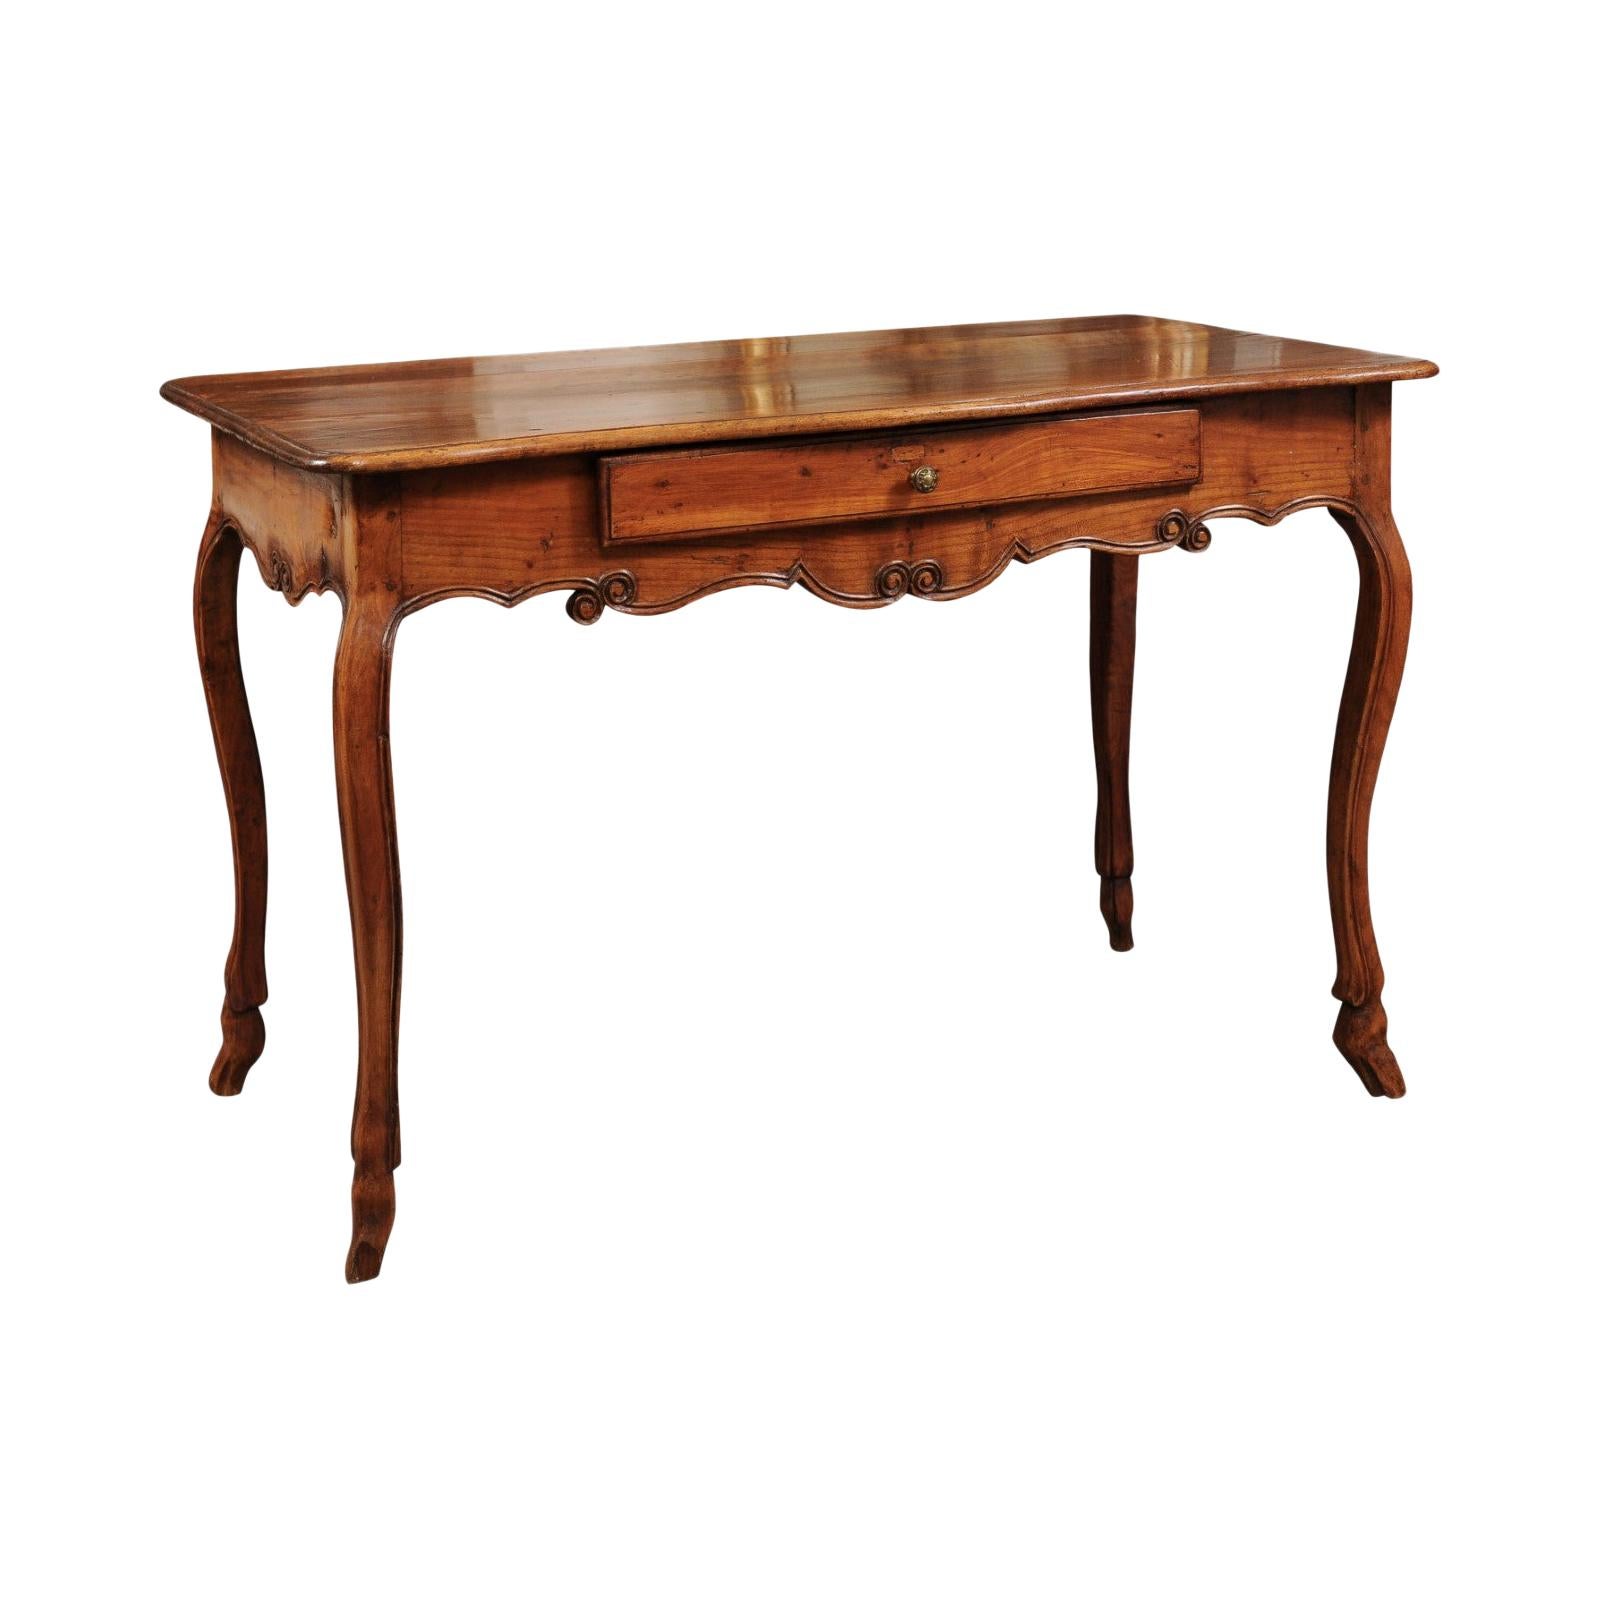 French Louis XV Fruitwood Console Table, Mid-18th Century